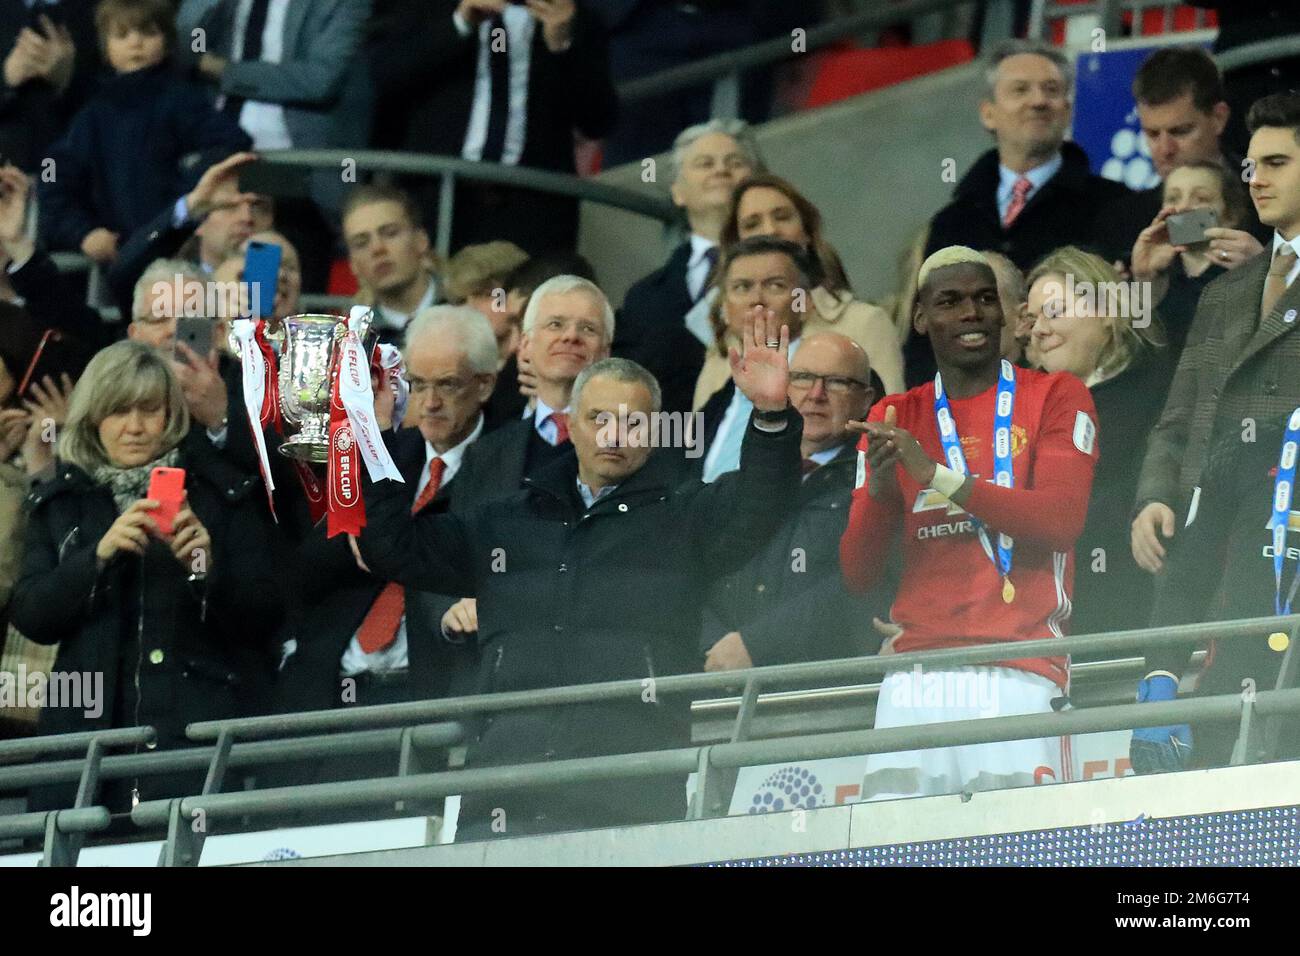 Manchester United Manager Jose Mourinho lifts the EFL trophy - Manchester United v Southampton, EFL Cup Final, Wembley Stadium, London - 26th February 2017. Stock Photo